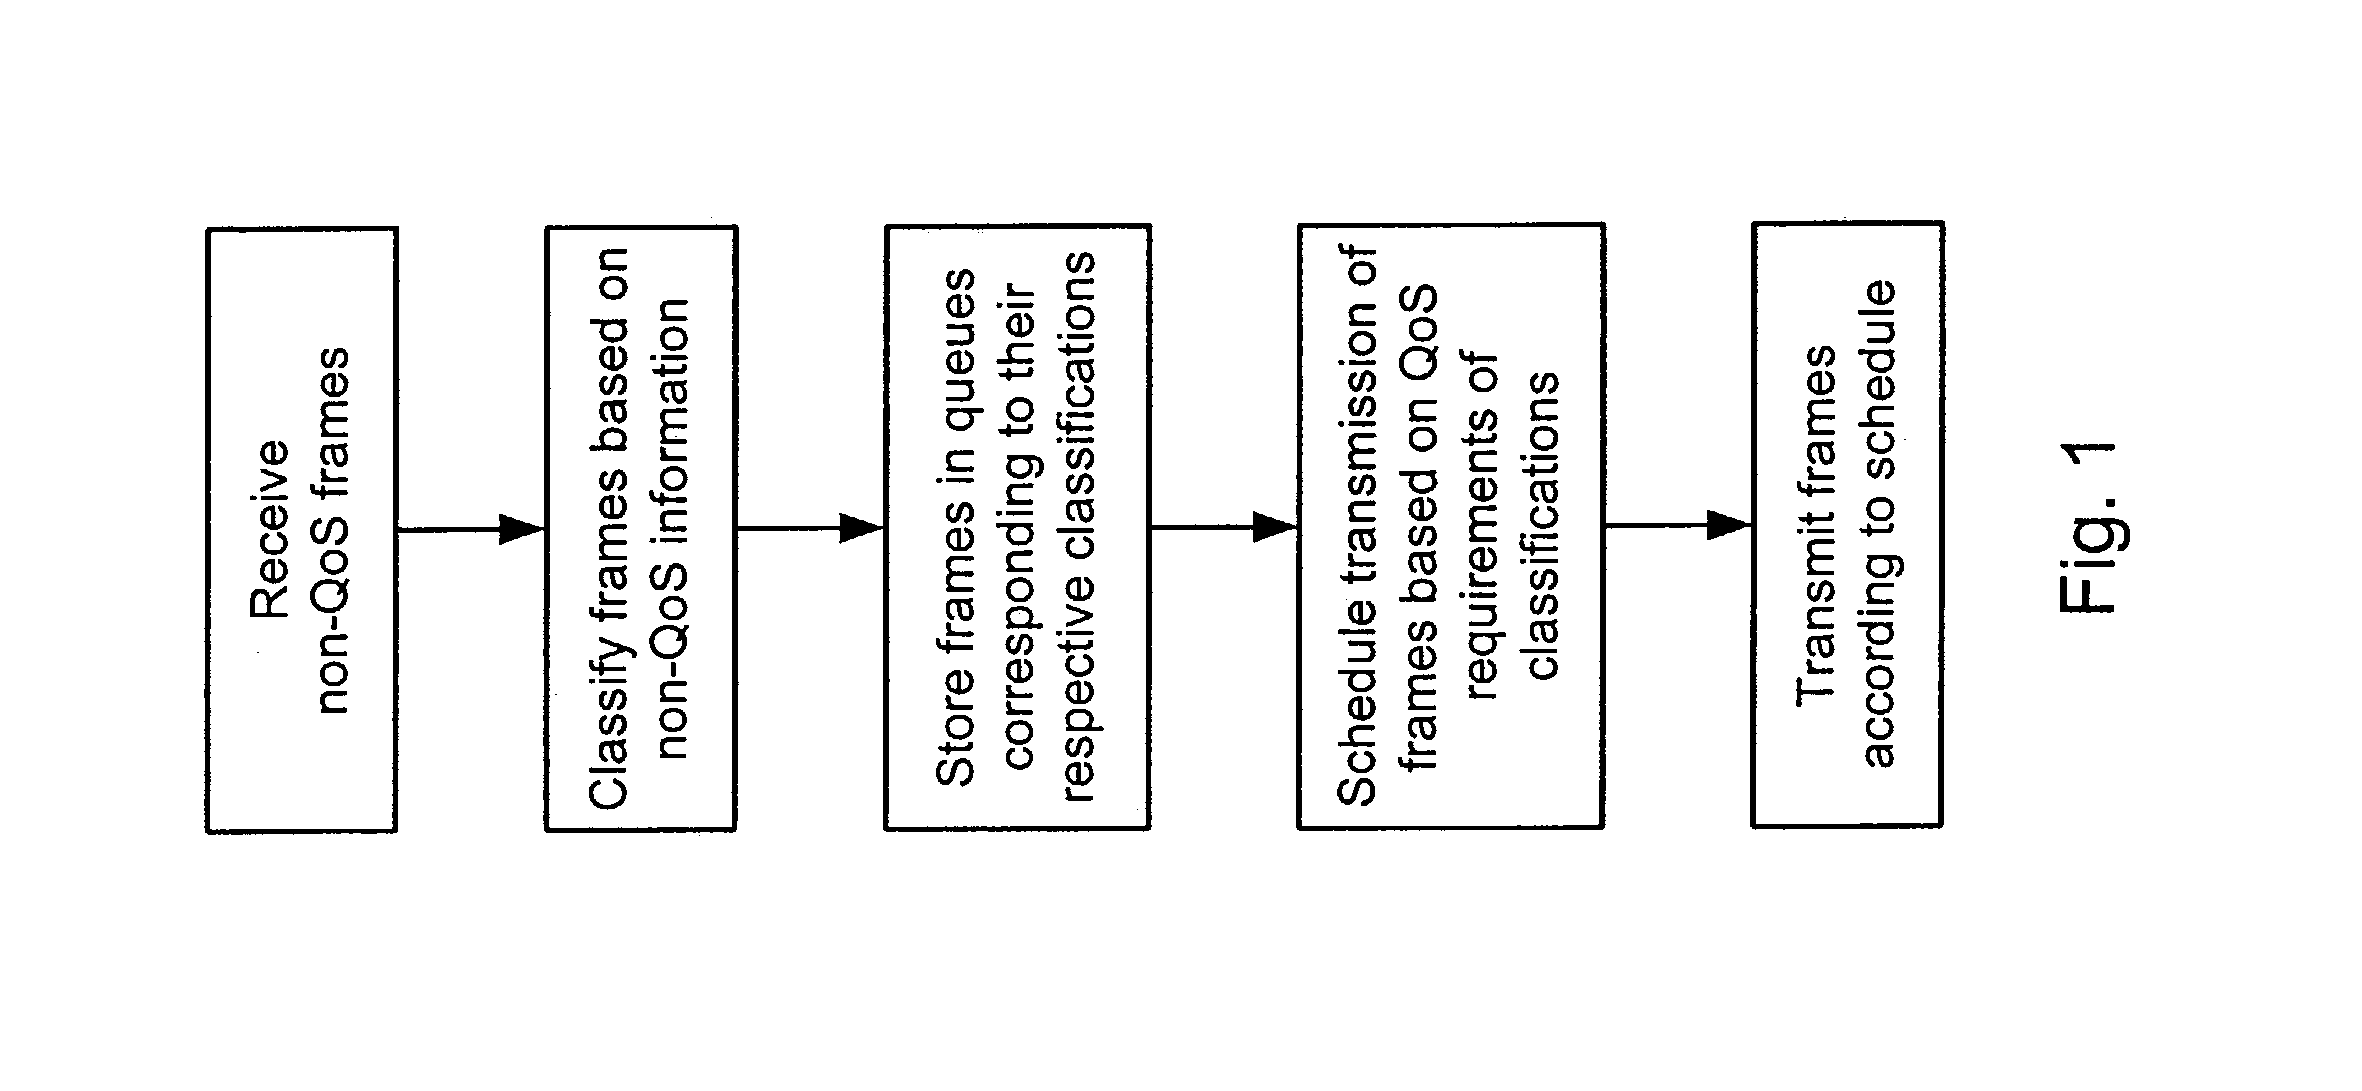 Systems and methods for providing quality of service (QoS) in an environment that does not normally support QoS features